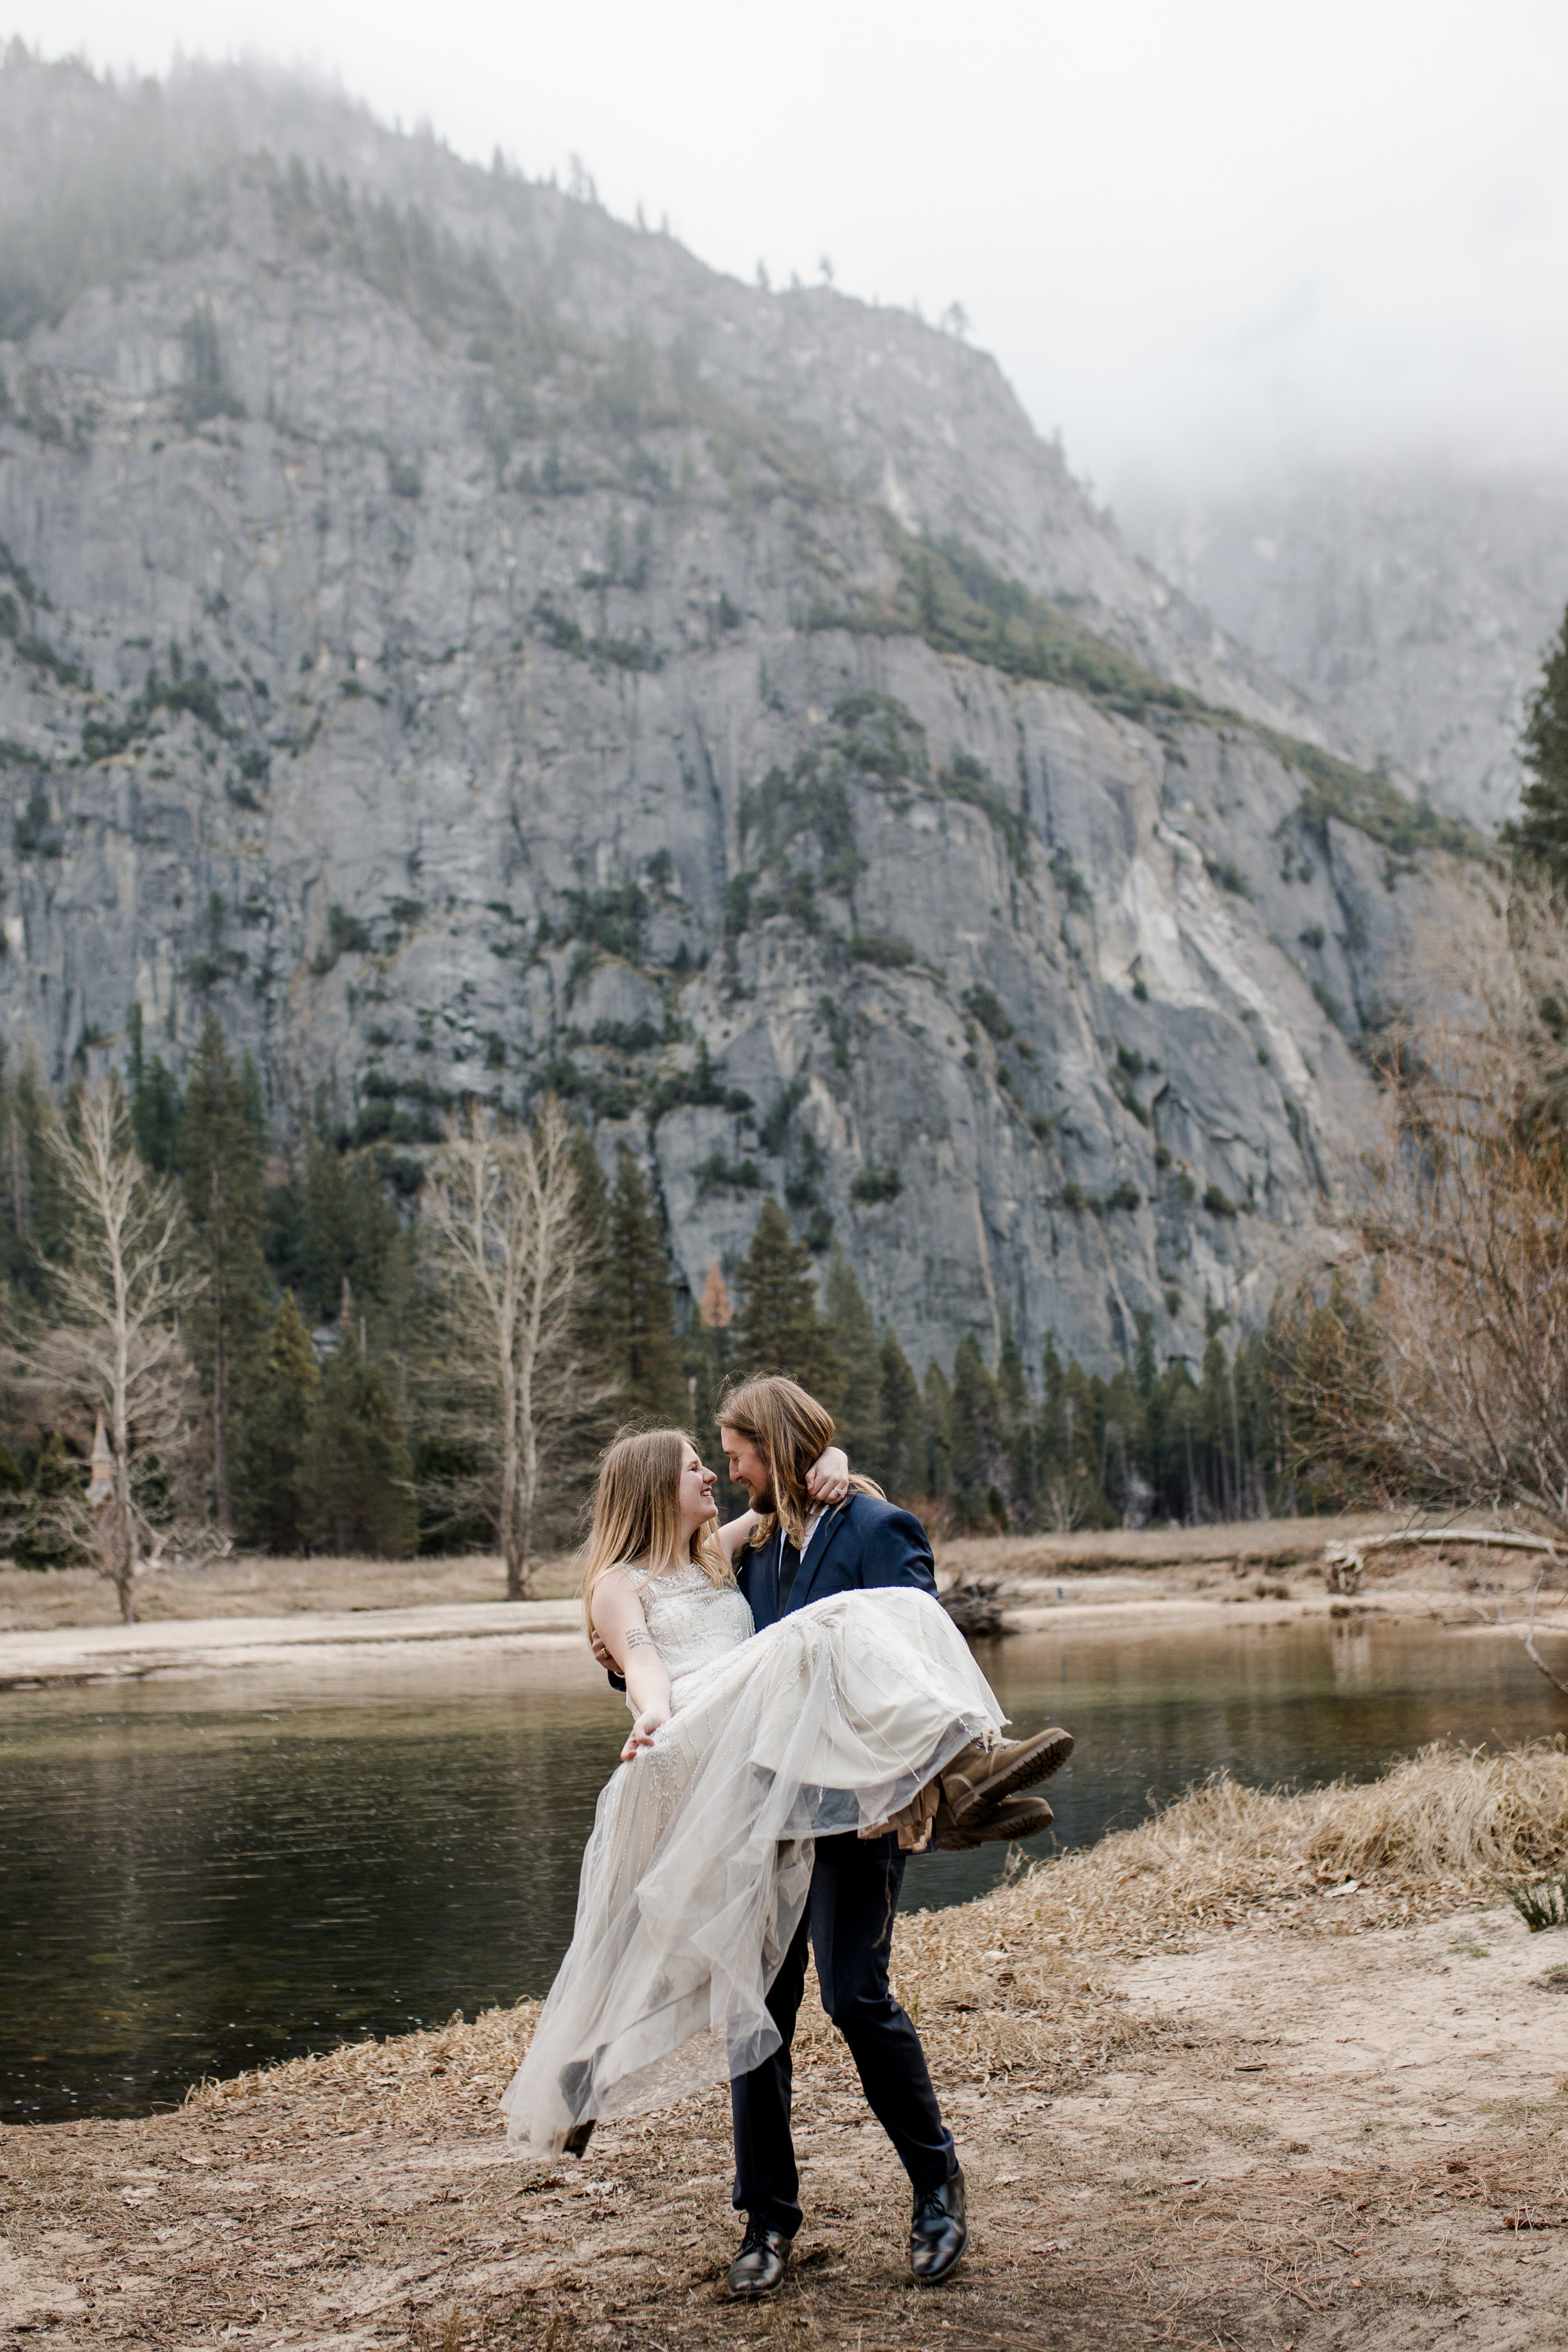 nicole-daacke-photography-yousemite-national-park-elopement-photographer-winter-cloud-moody-elope-inspiration-yosemite-valley-tunnel-view-winter-cloud-fog-weather-wedding-photos-42.jpg